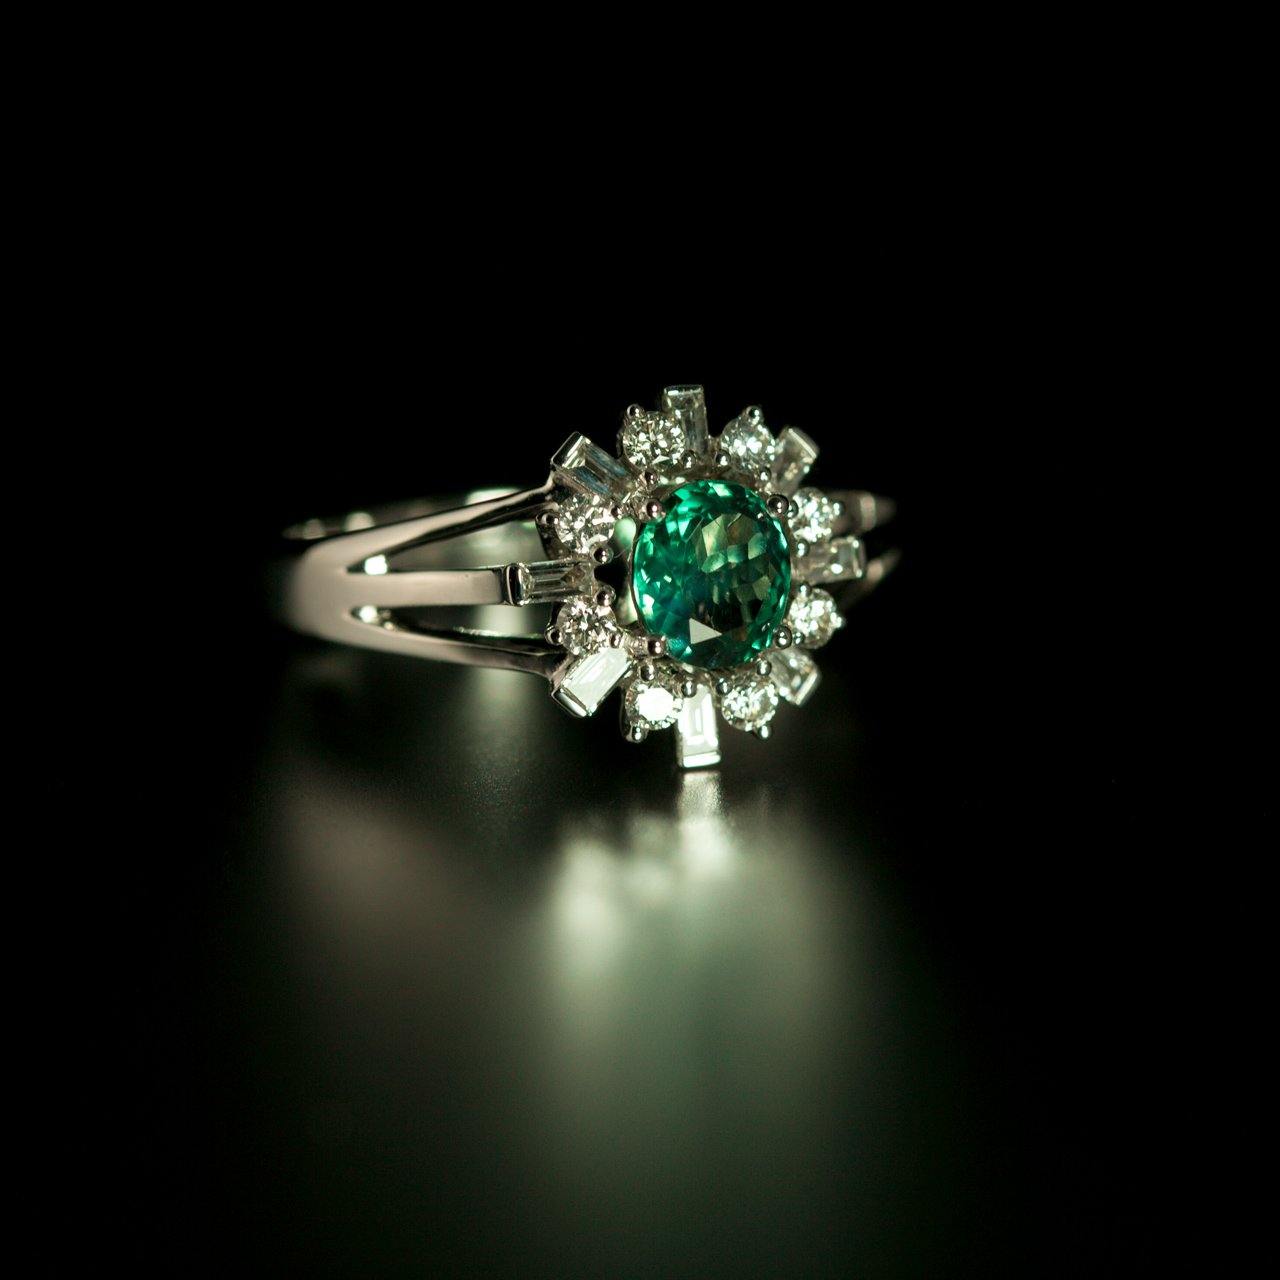 Elegant 0.78ct alexandrite ring set in platinum with a halo of sparkling diamonds